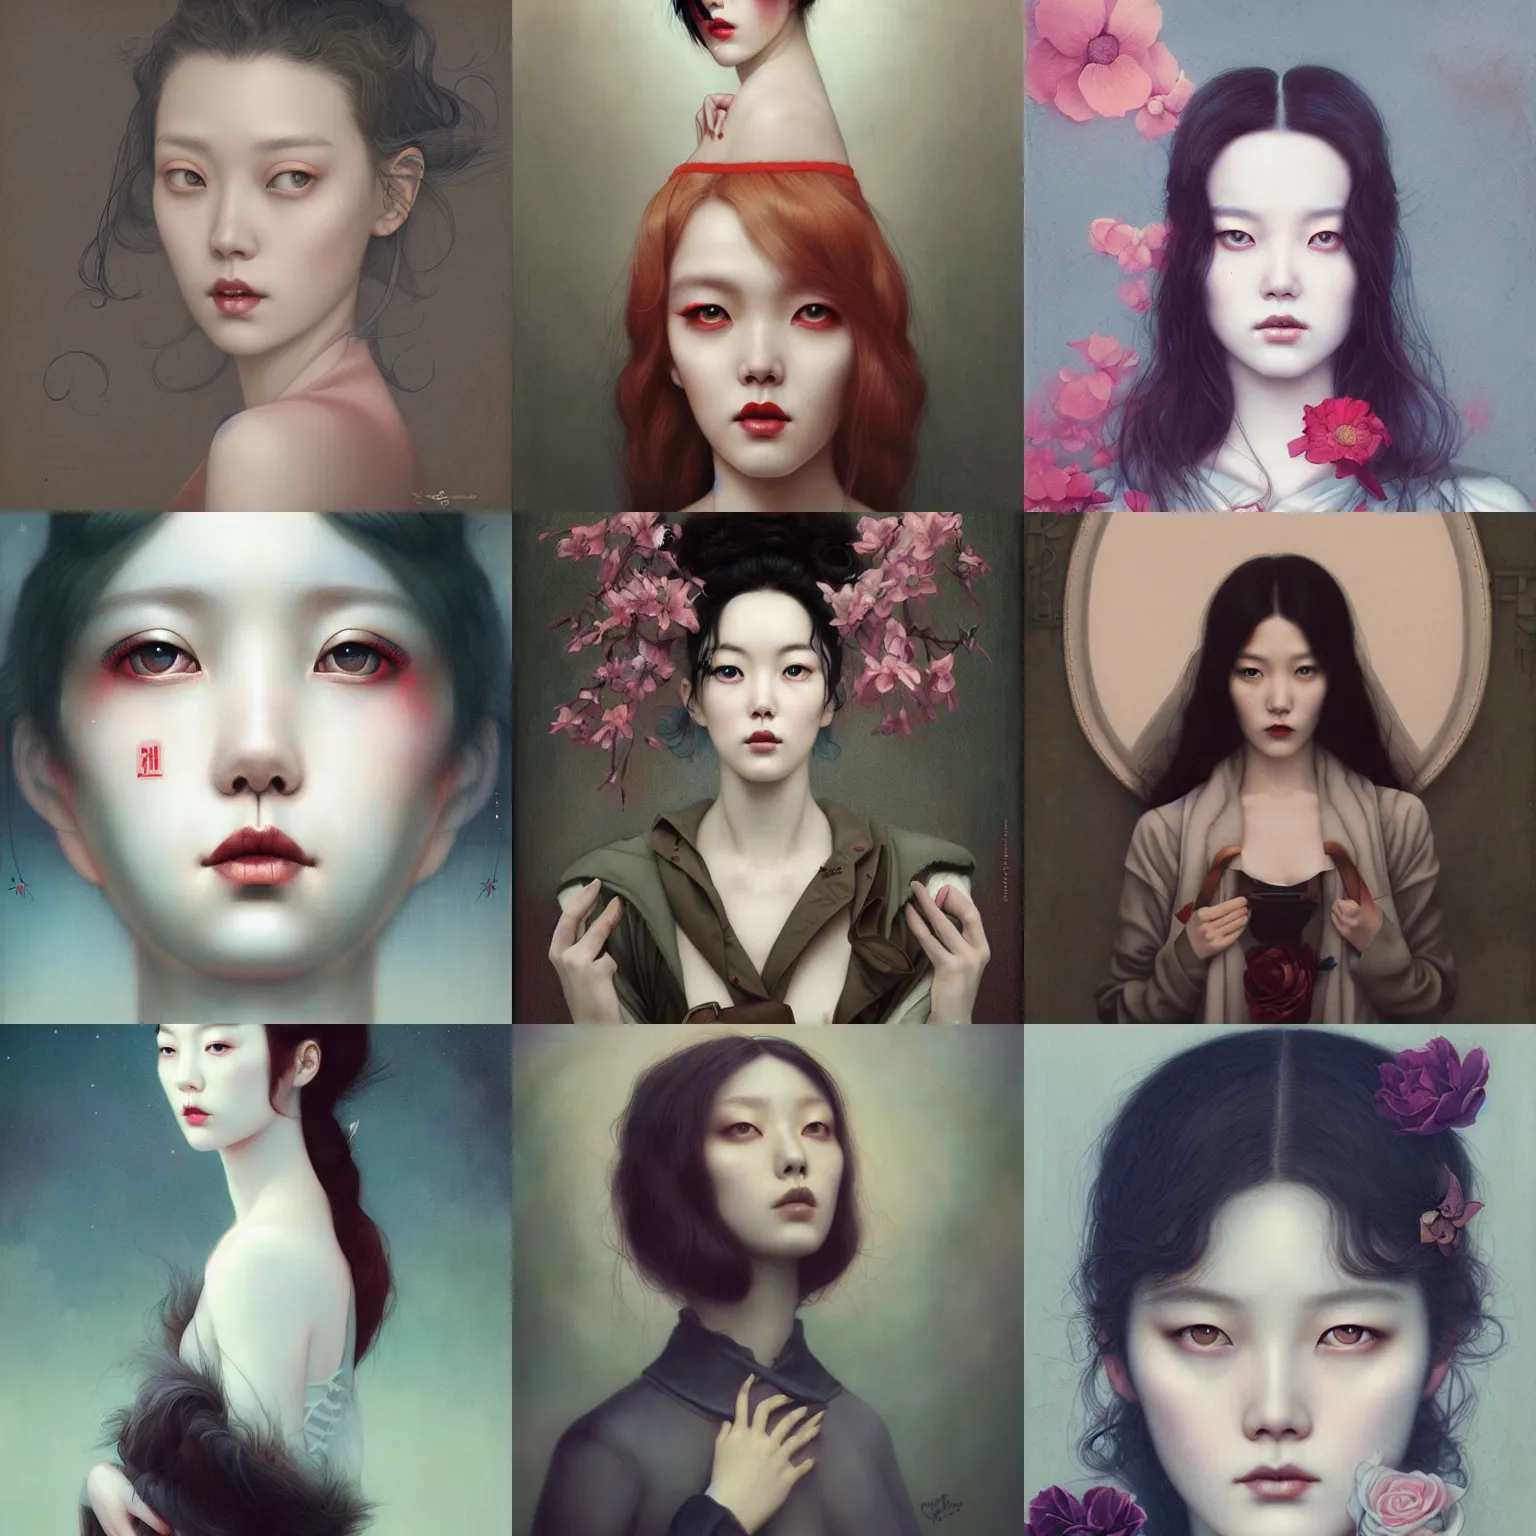 Prompt: lee jin - eun by tom bagshaw and martine johanna, rule of thirds, seductive look, beautiful